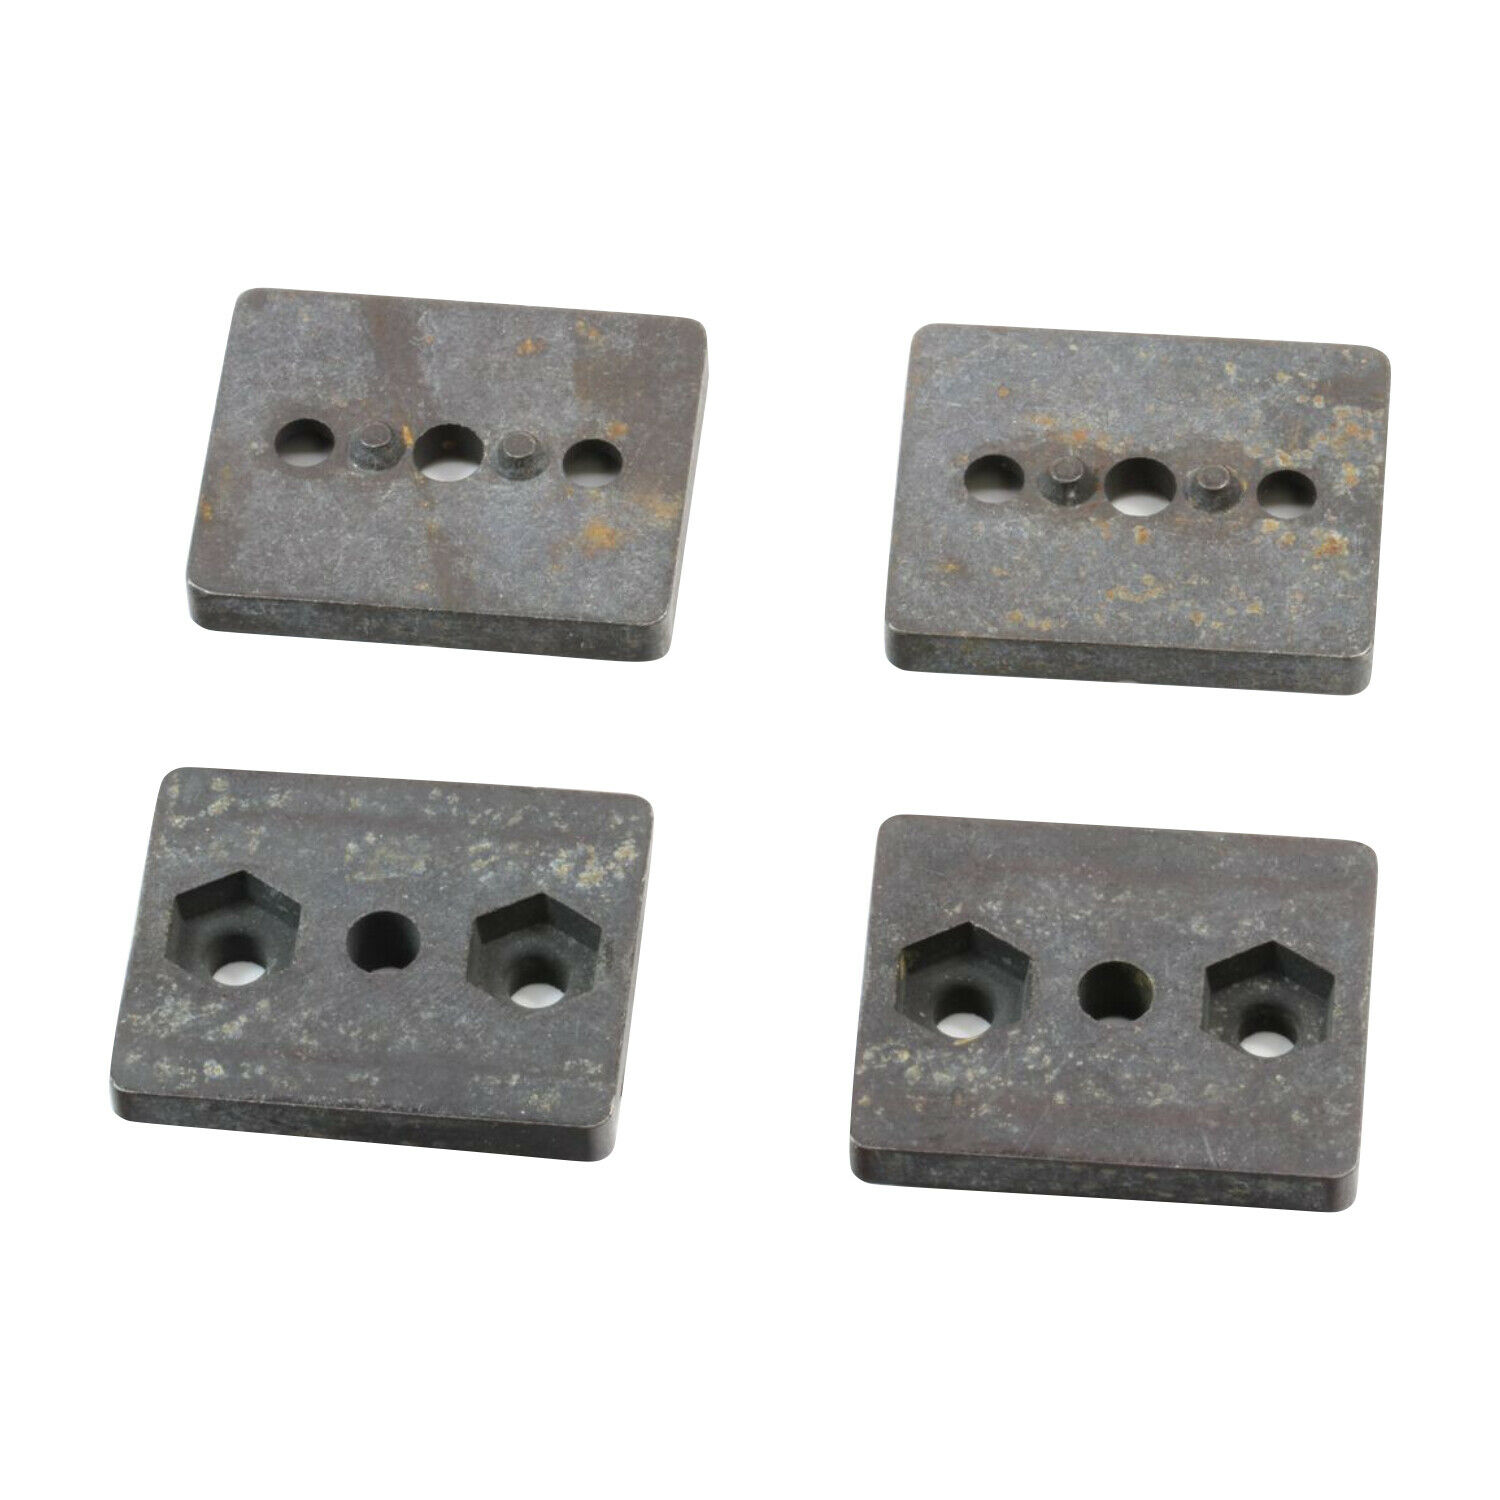 Euro Limited Heat Treated Steel Bushings Replacement for Euro Handle It Tool